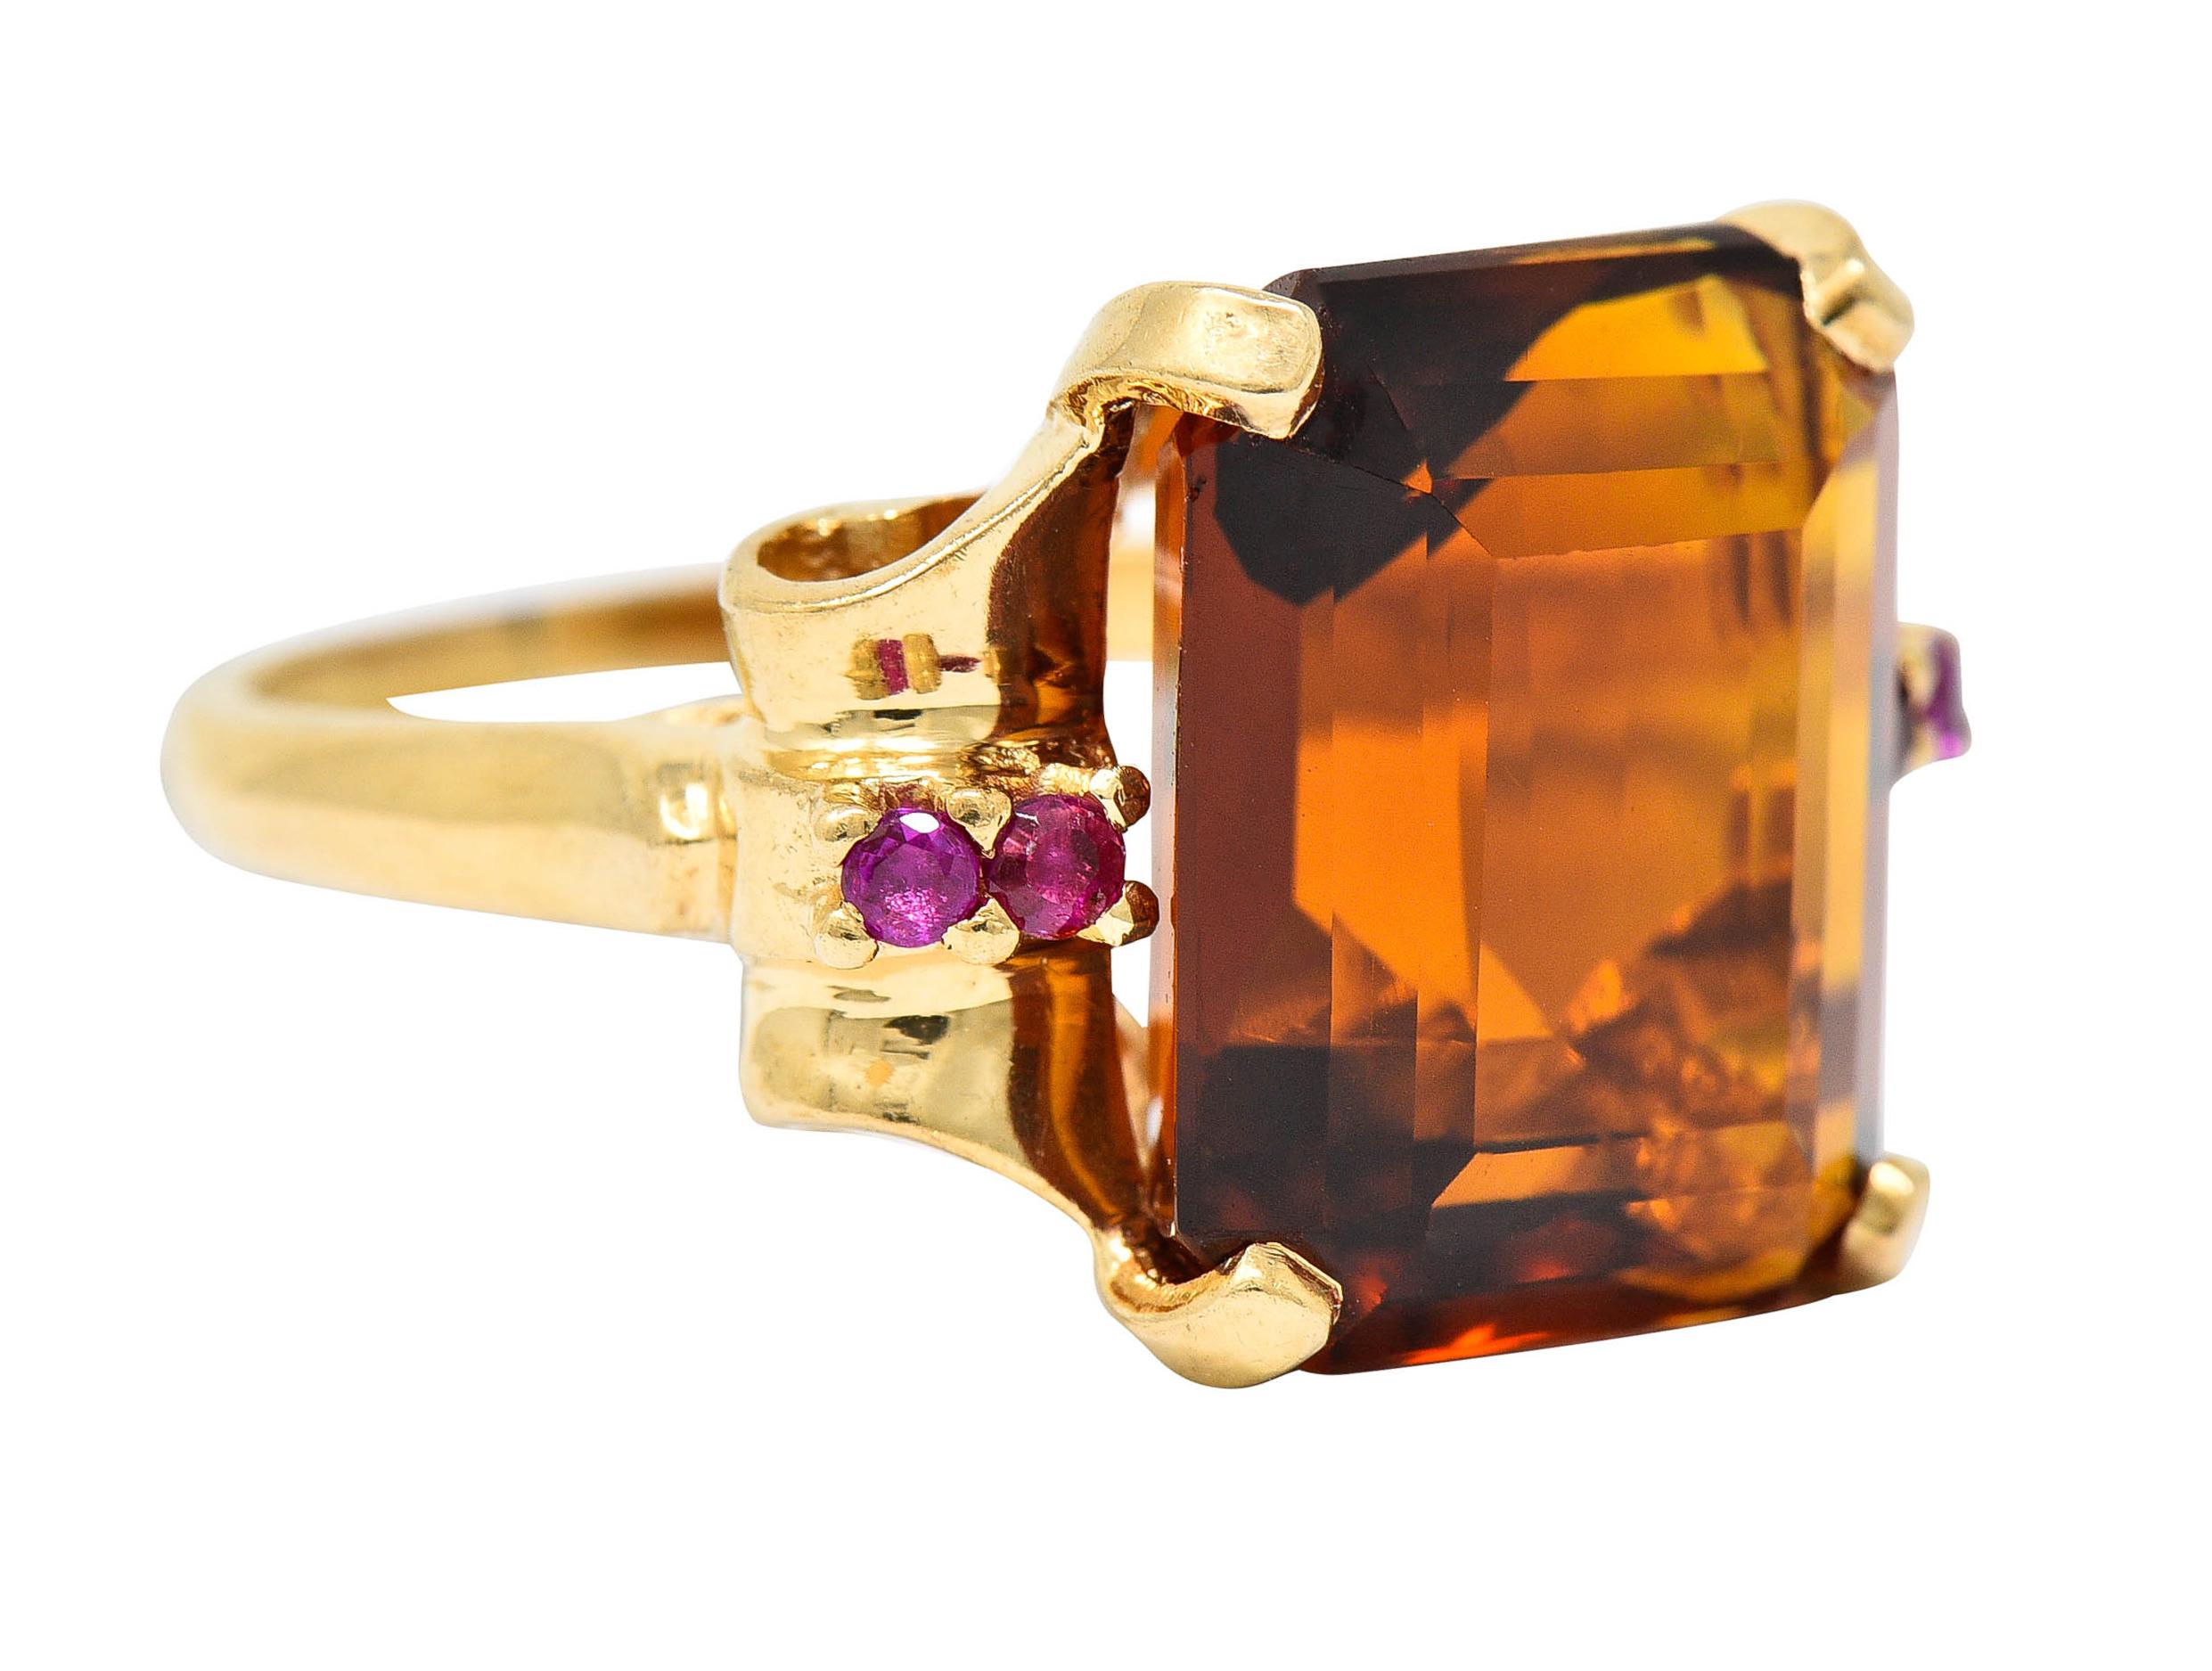 Centering an emerald cut citrine measuring approximately 14.0 x 11.8 mm

Transparent with strong brownish orange color

Set in a stylized basket with scrolled volute shoulders

Accented by round cut rubies - well matched in purplish red